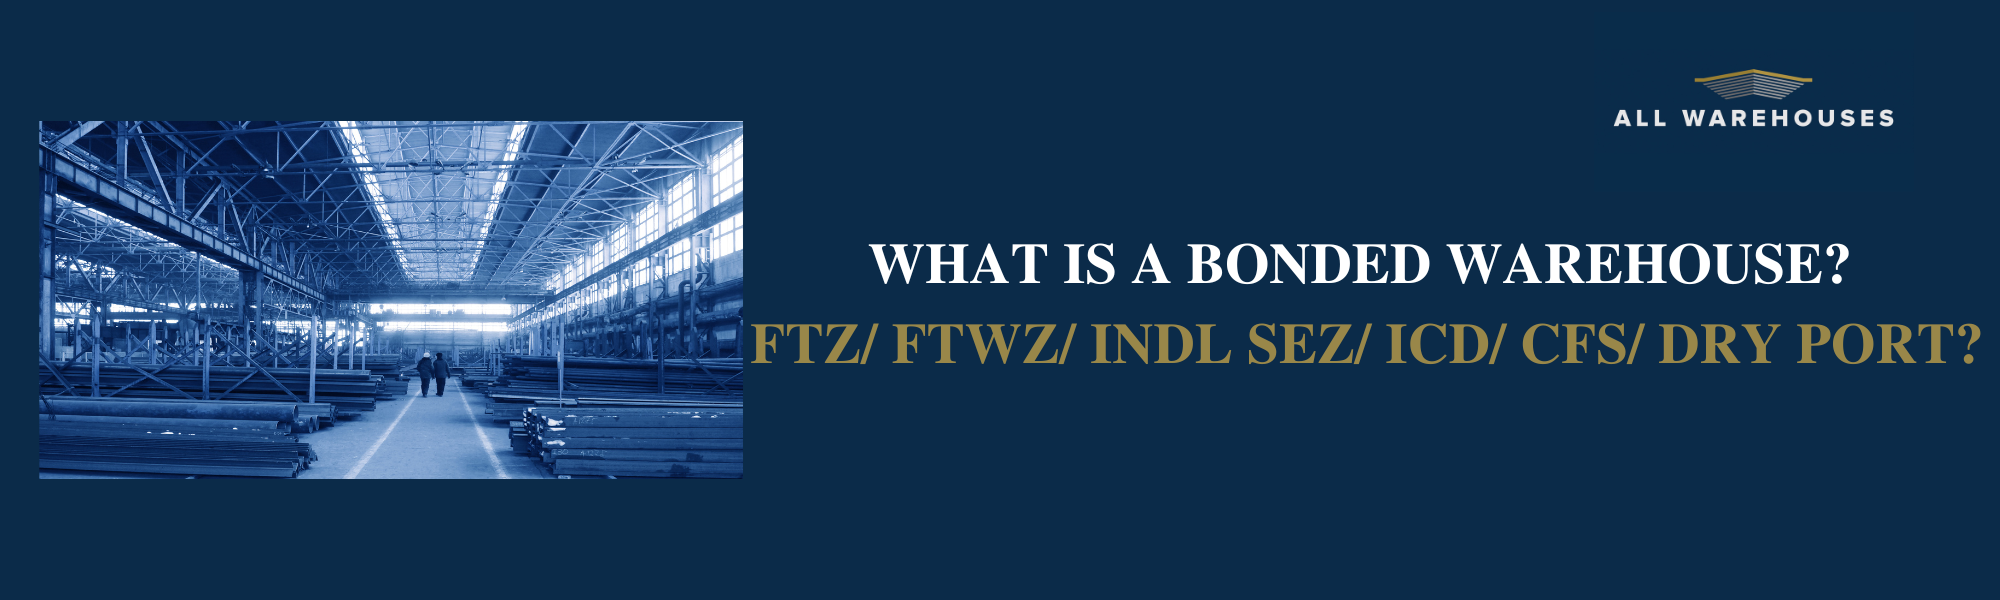 What is a Bonded warehouse? FTZ/ FTWZ/ Indl SEZ/ ICD/ CFS/ Dry Port?